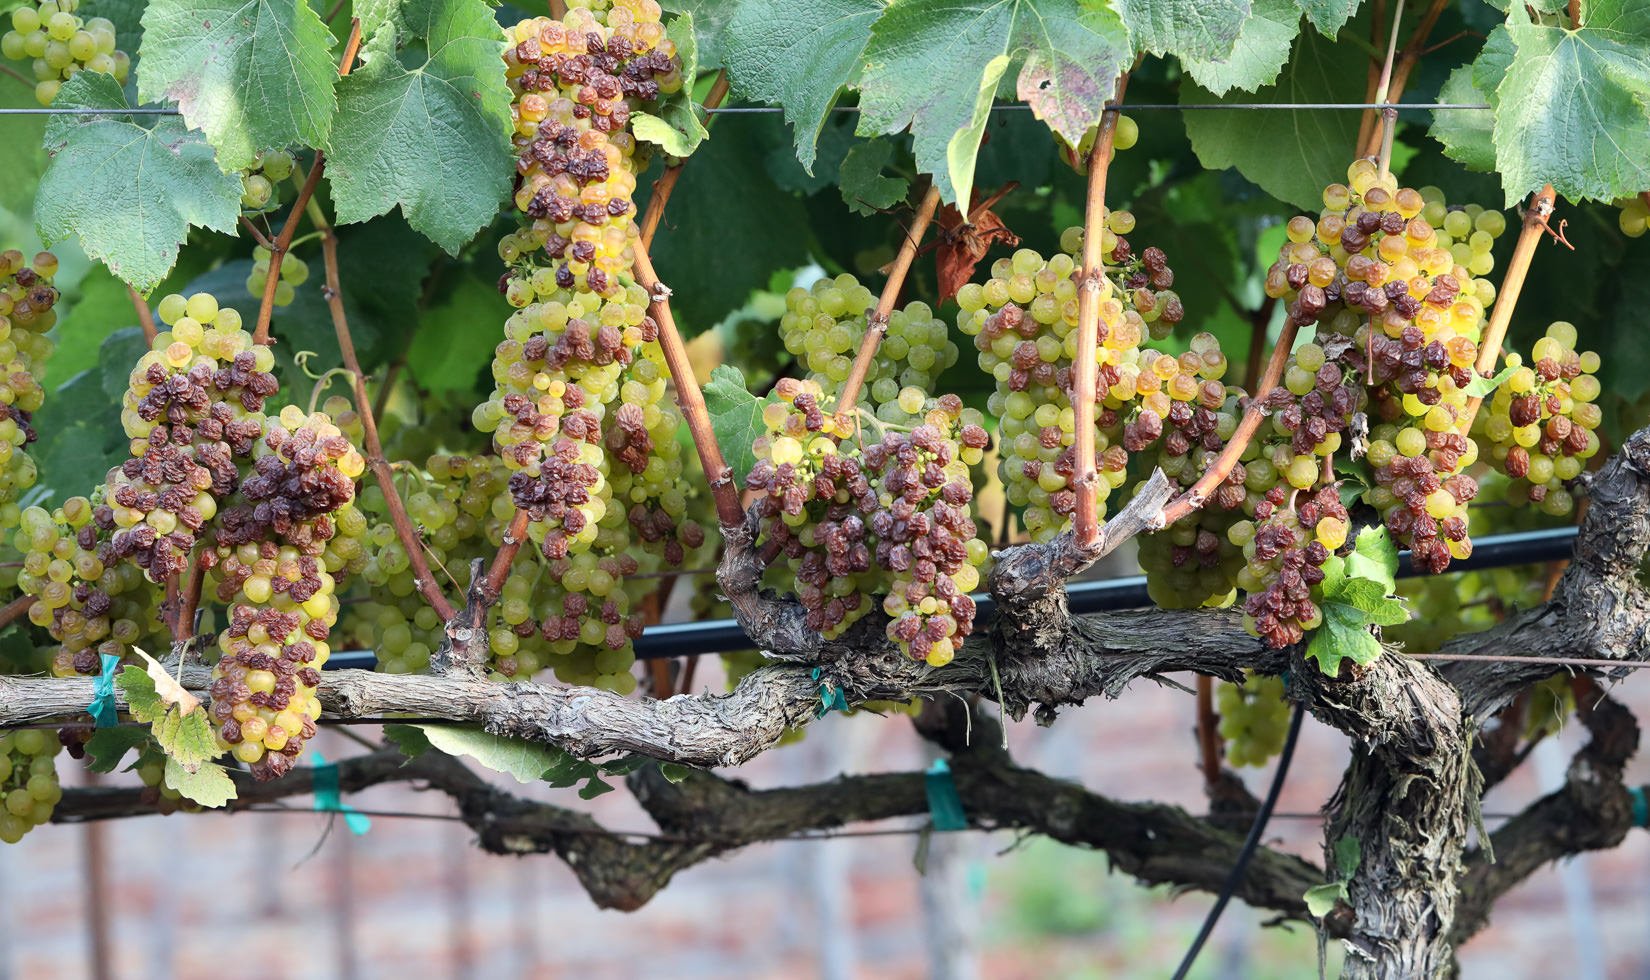 Russian River Valley Chardonnay grapes sunburned by 2017 California heat wave